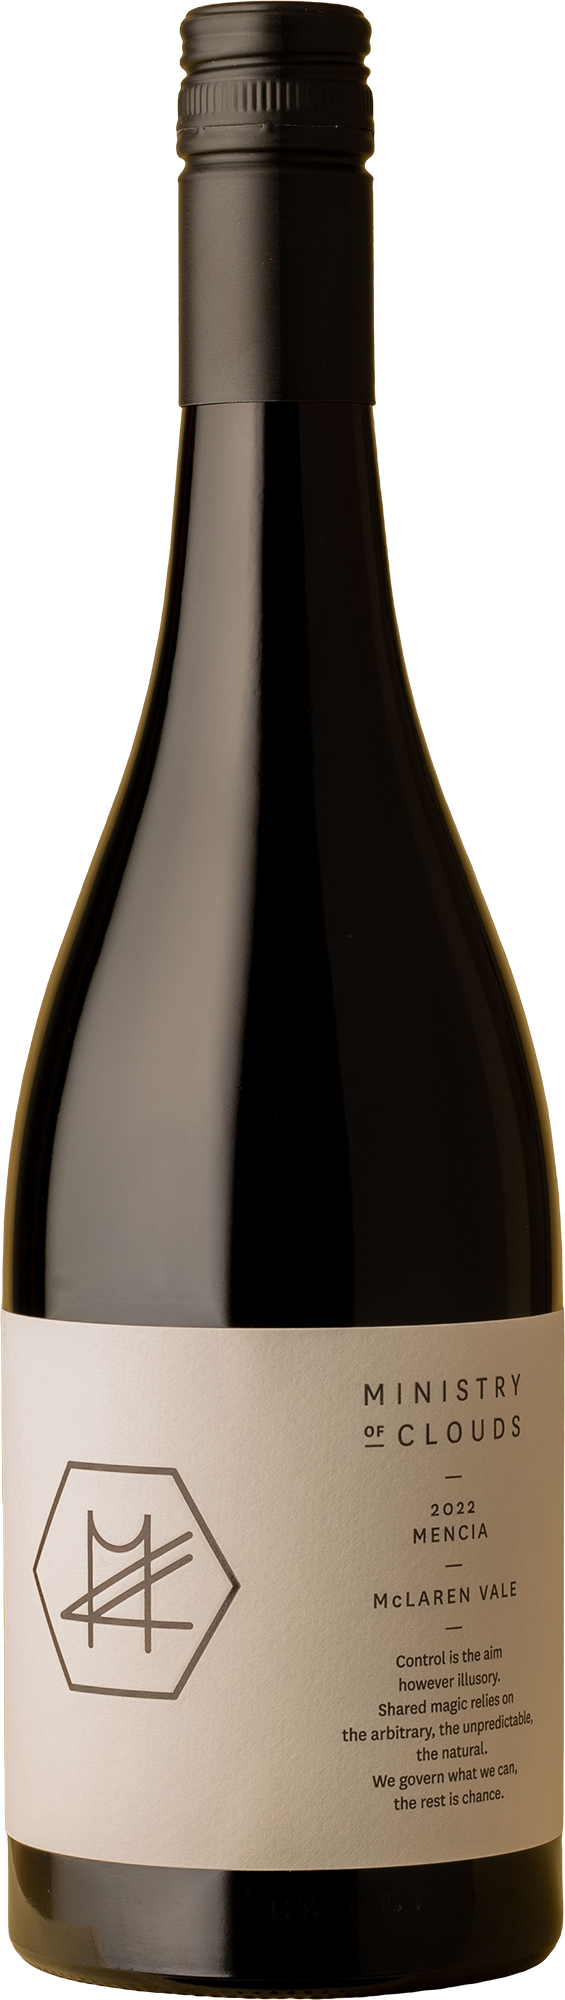 Ministry of Clouds - Mencia 2022 Red Wine